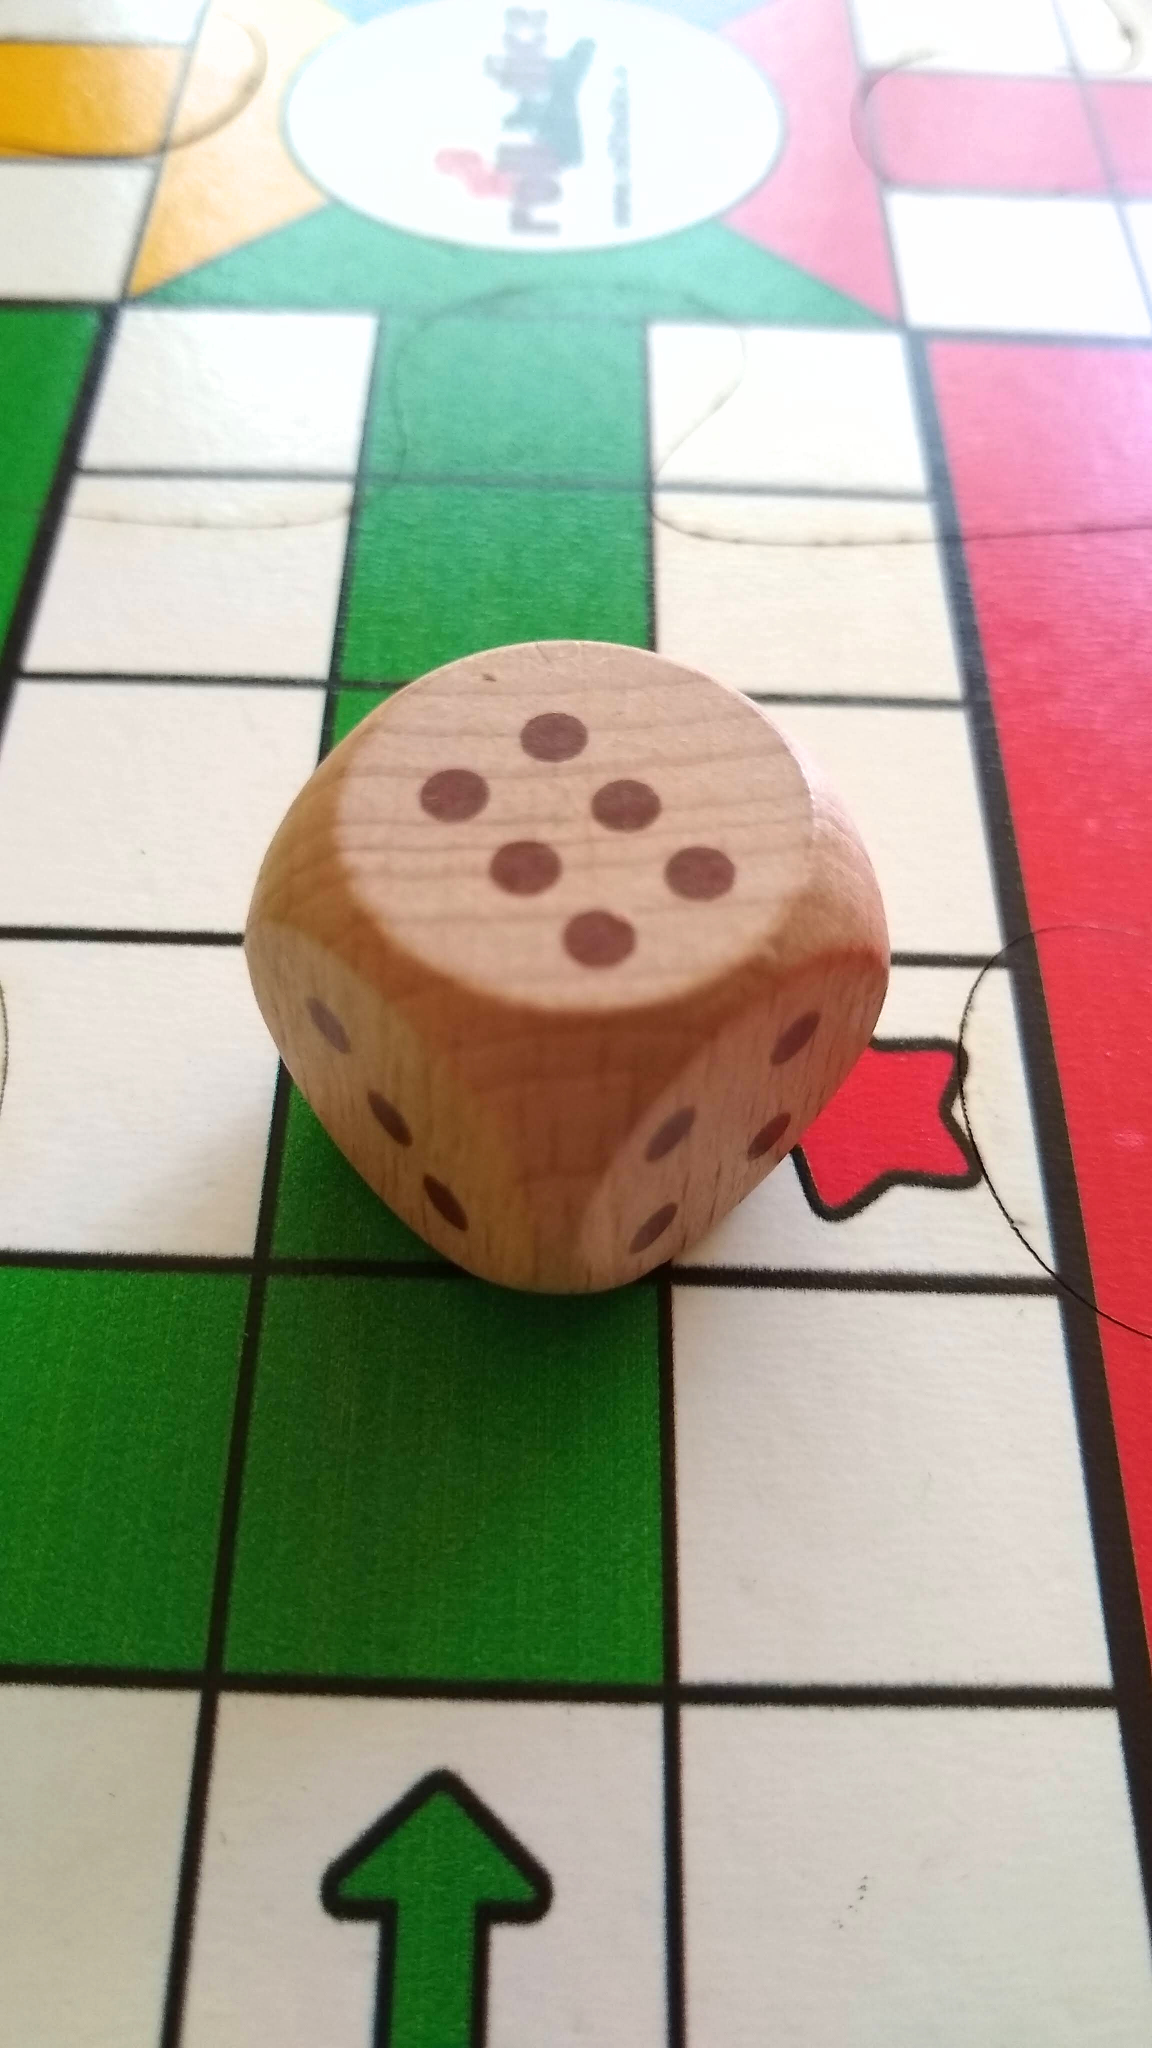 Roll the Dice - Snakes & Ladders and Ludo Games